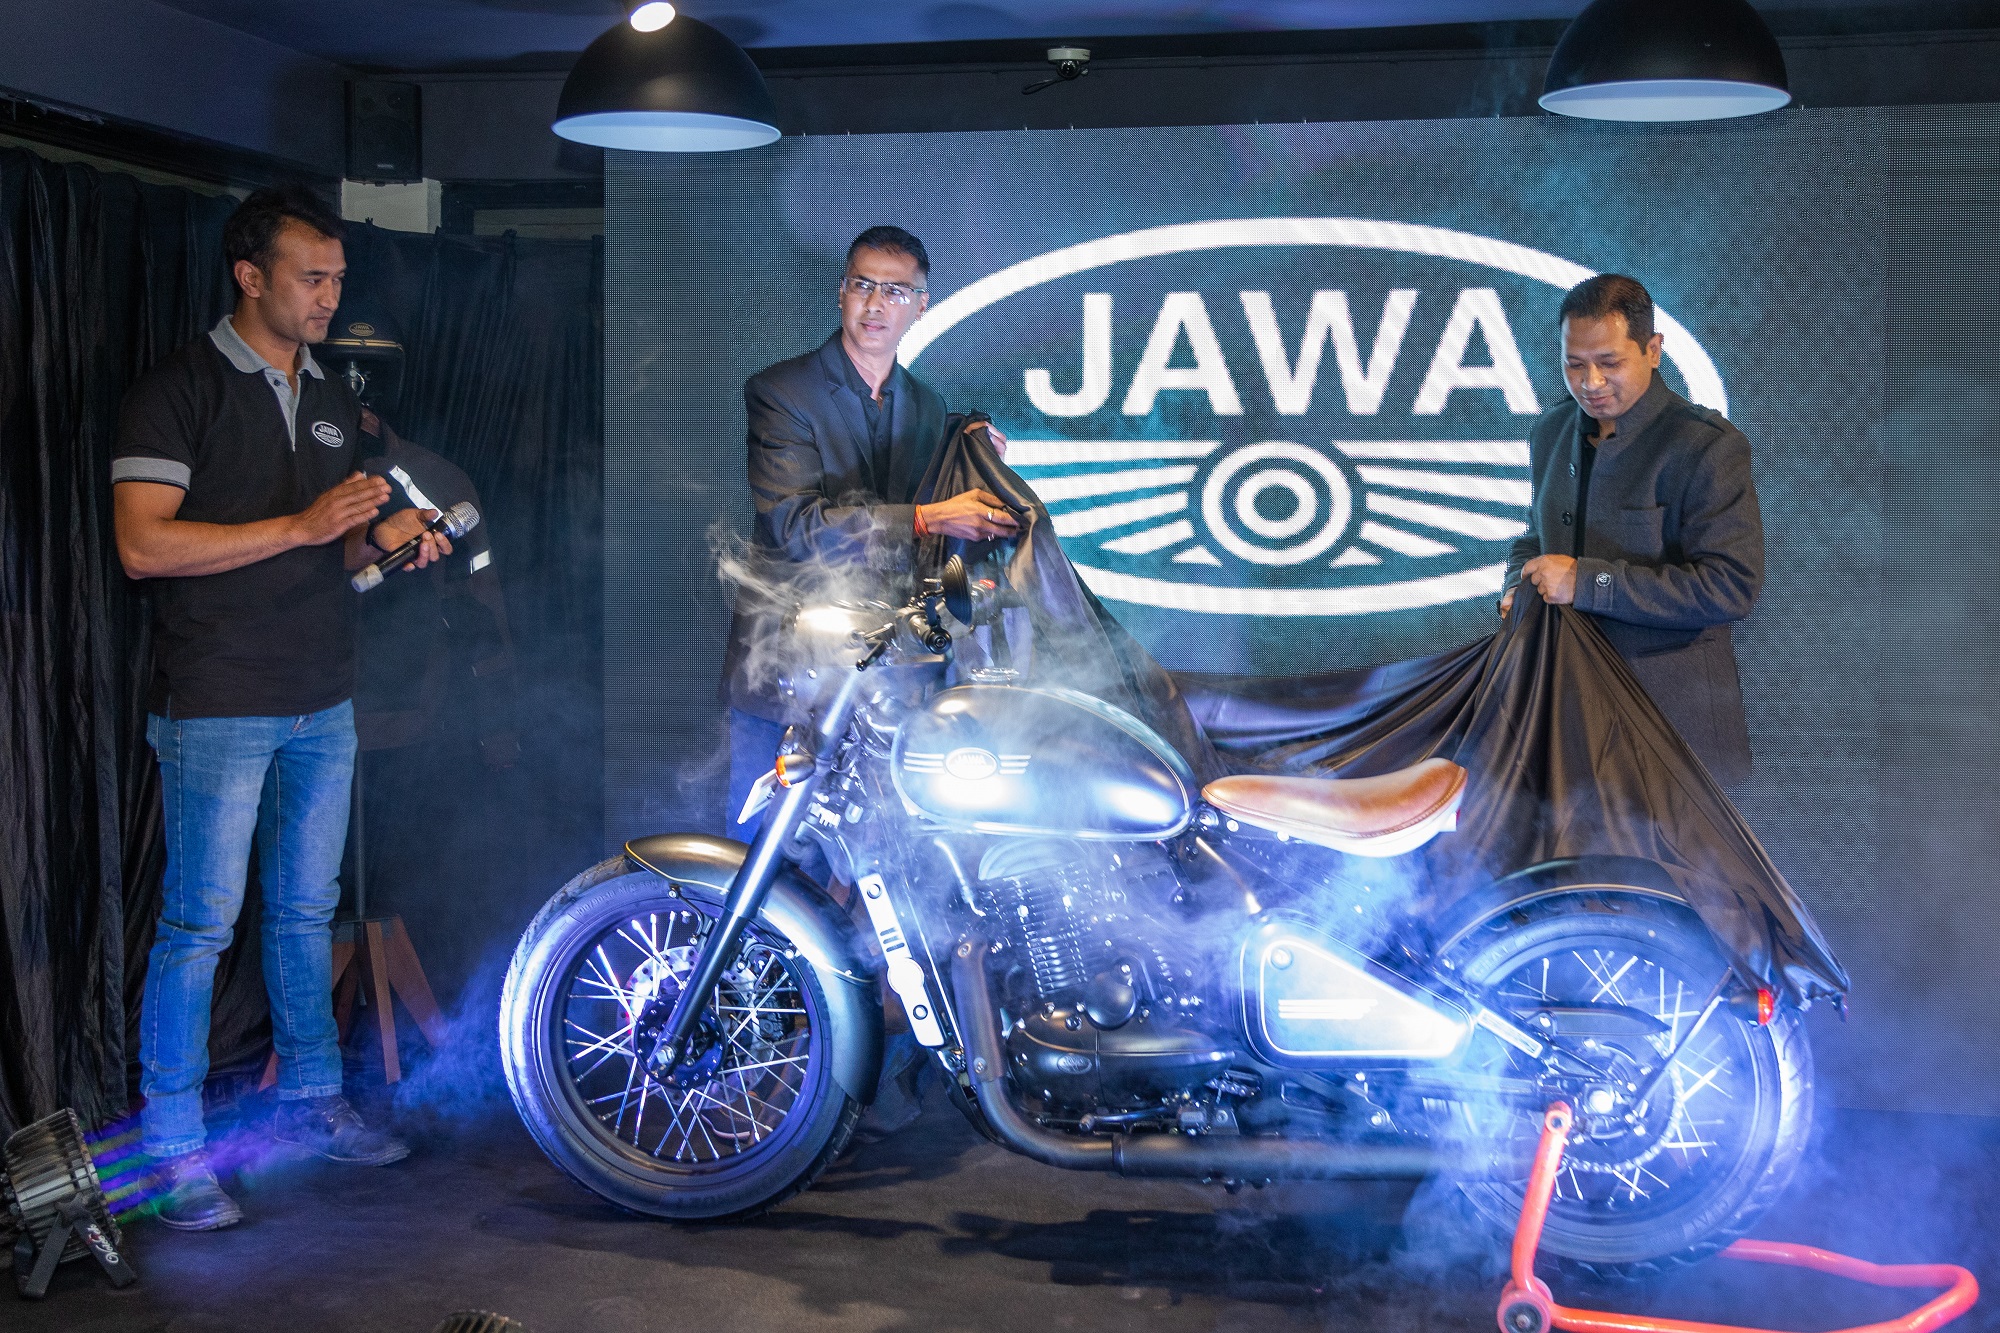 Jawa-Perak is now available in all showrooms